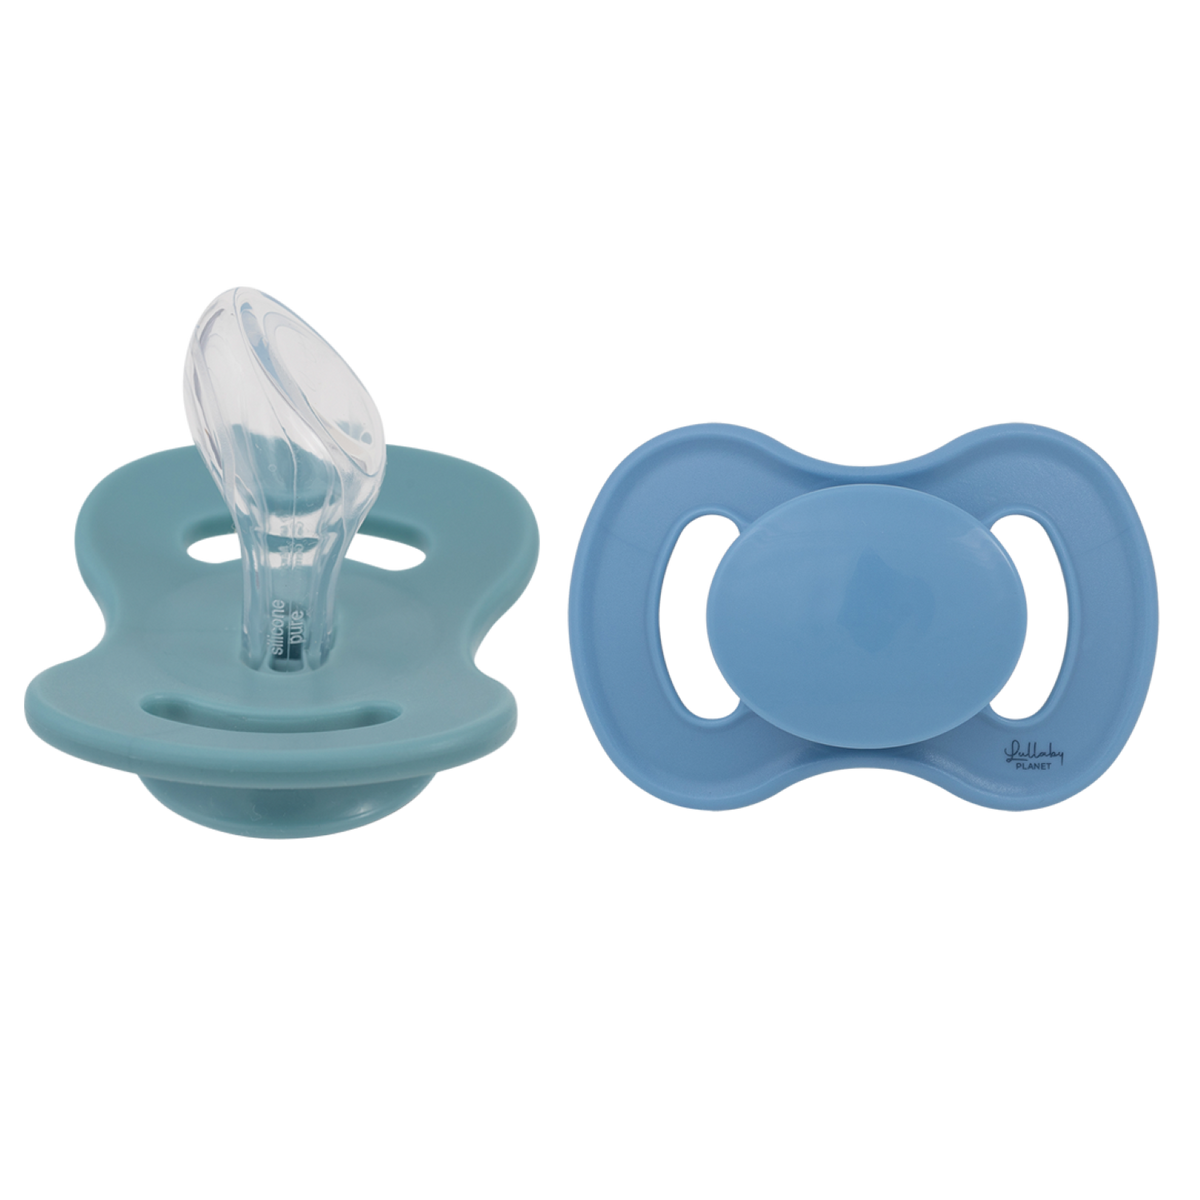 Lullaby Planet Dental Silicone Soothers Size 2 - Ocean Teal & Dove Blue 2 pcs product image